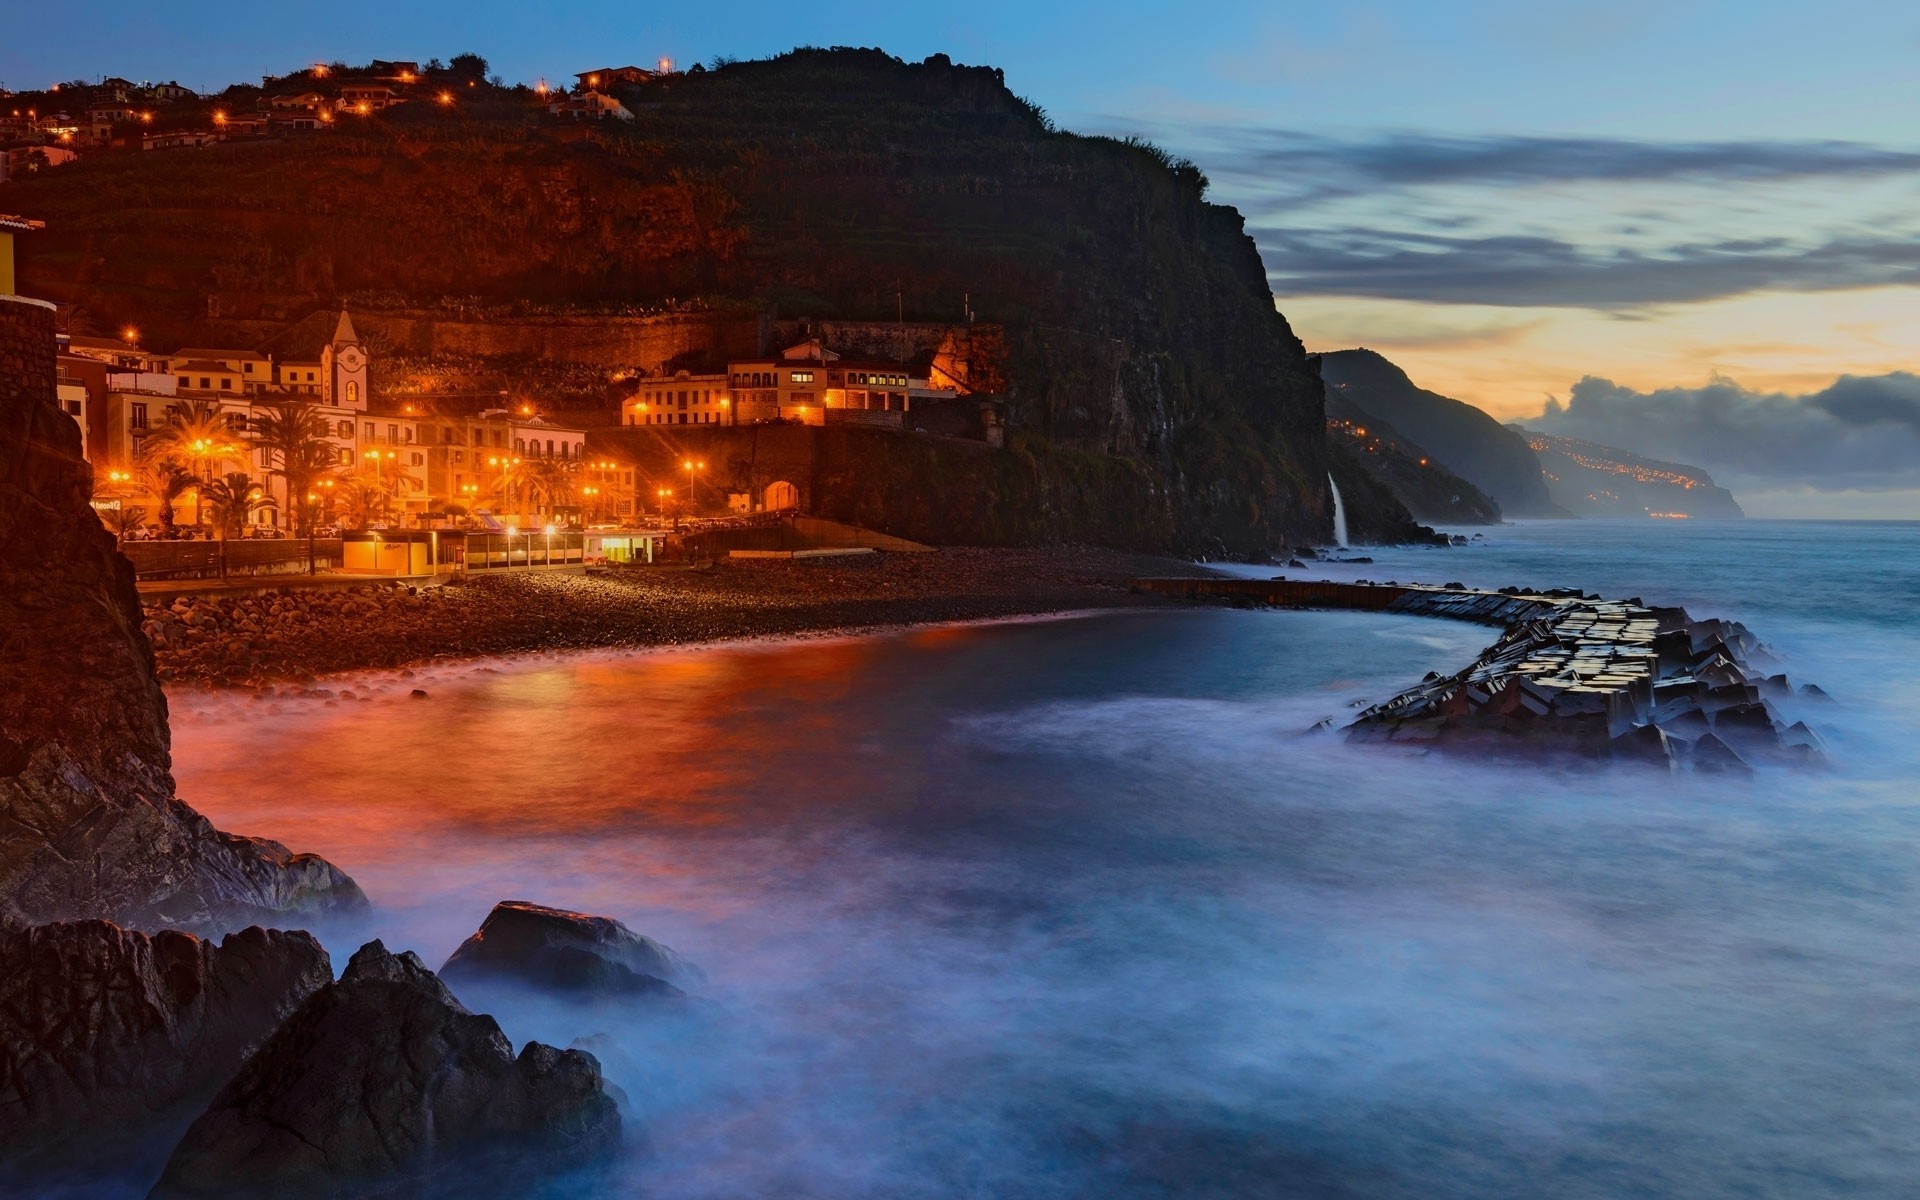 Nature landscape photography bay beach island sea city architecture lights evening cliff madeira portugal wallpapers hd desktop and mobile backgrounds